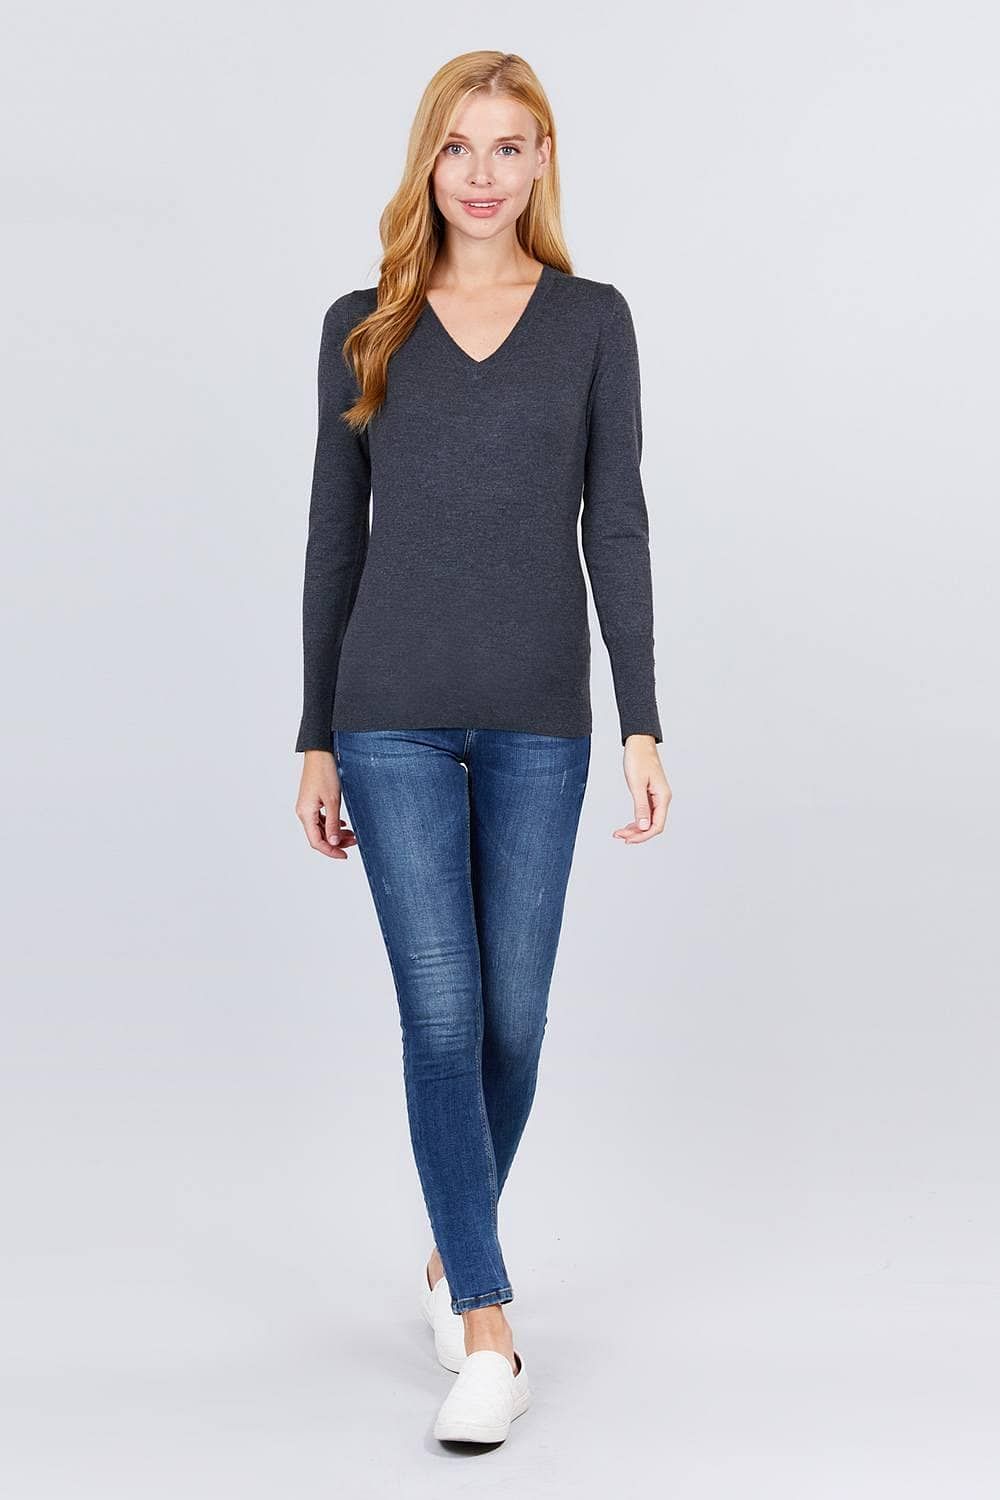 Charcoal Gray V-Neck Sweater - Shopping Therapy, LLC 